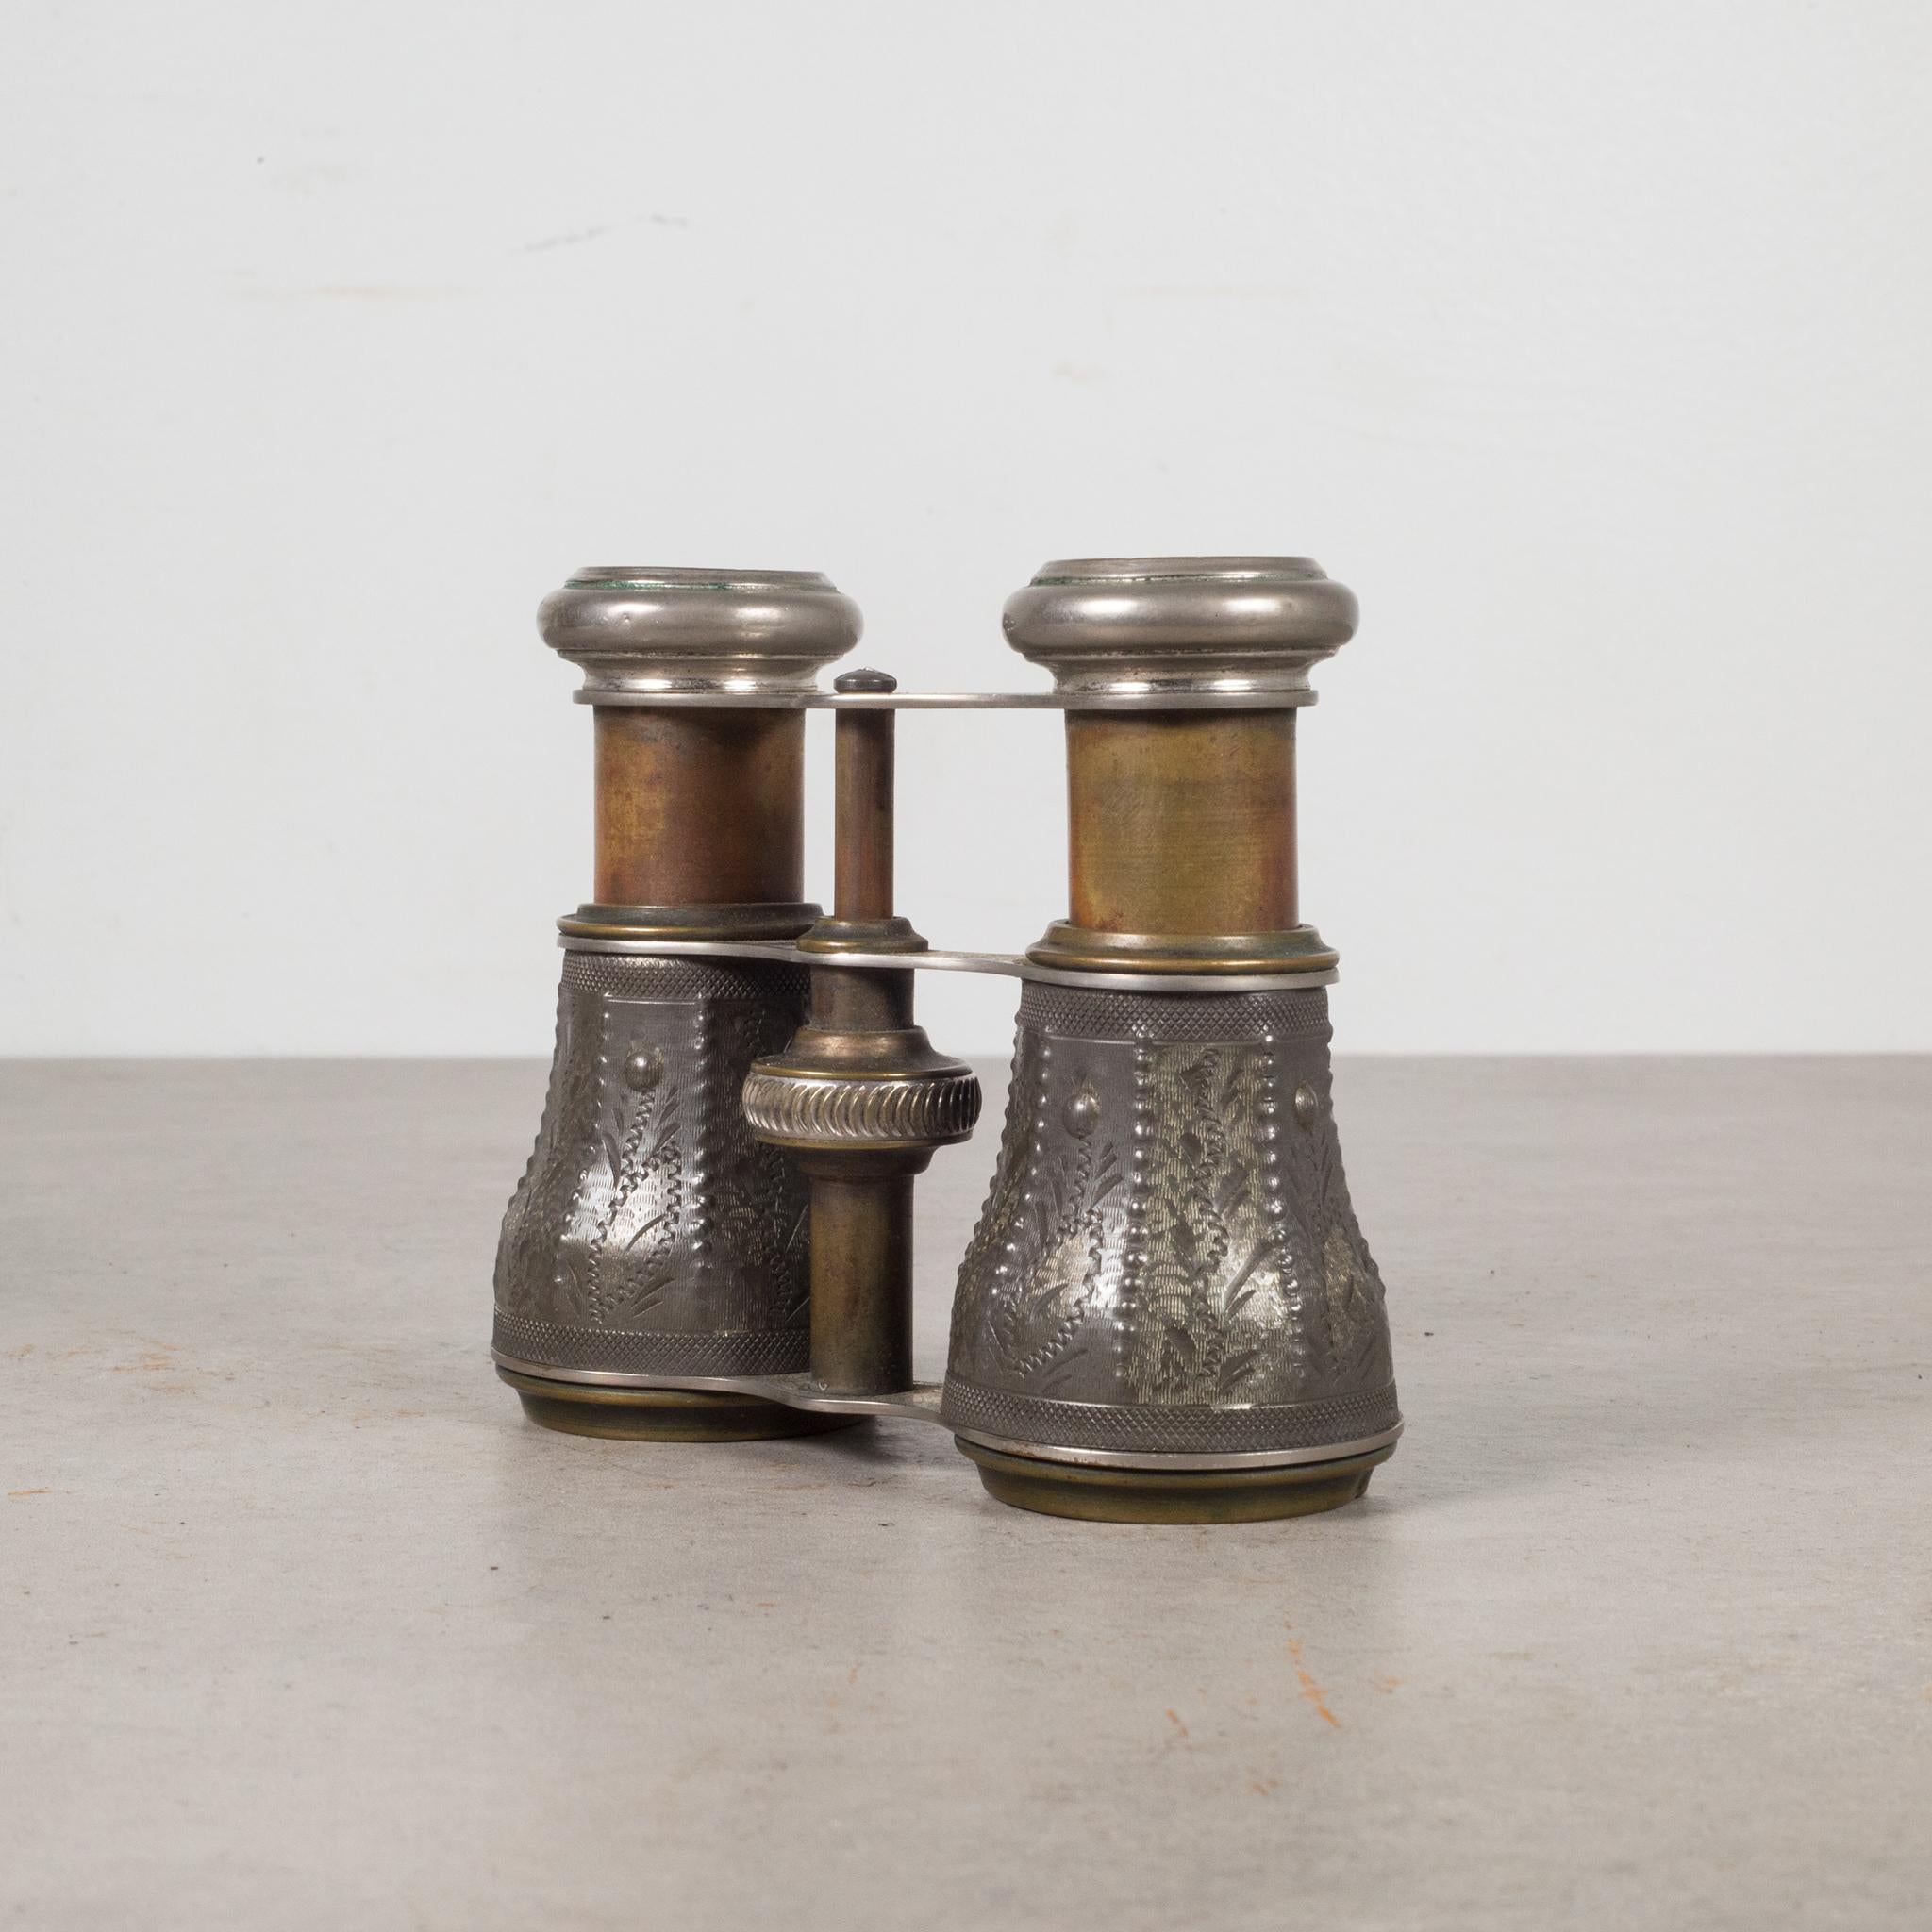 About

This is an original pair of brass plated binoculars with embossed pewter barrels. 